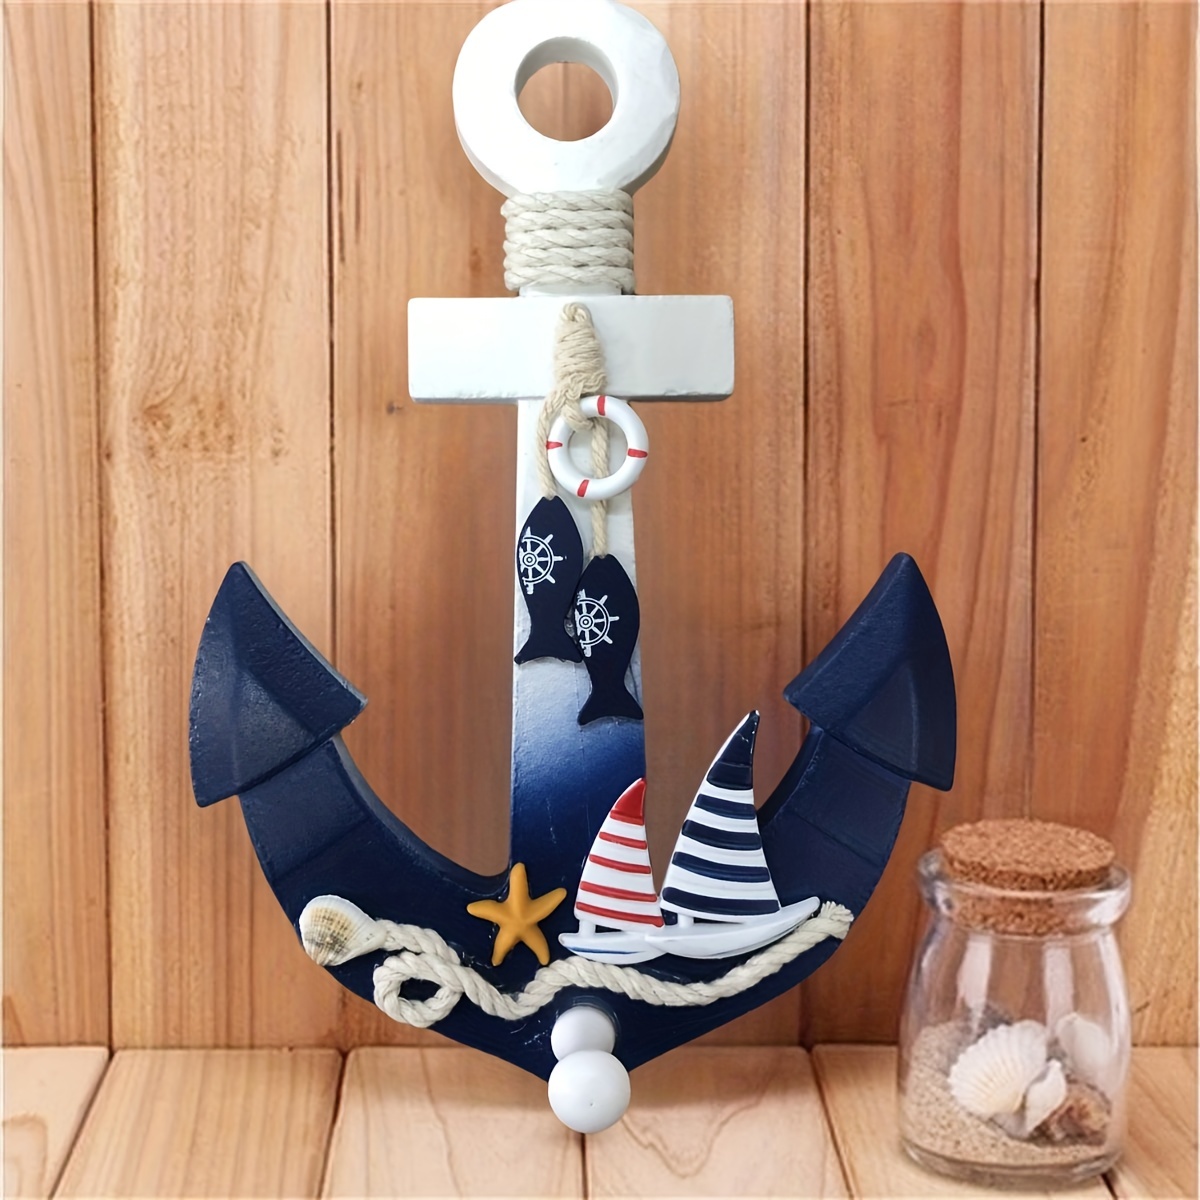 Wooden Anchors Decoration With Rope And Starfish Vintage Home Wall Decor  Marine Mediterranean Style Nautical Decor Crafts Beach Theme Decorative  Hangi